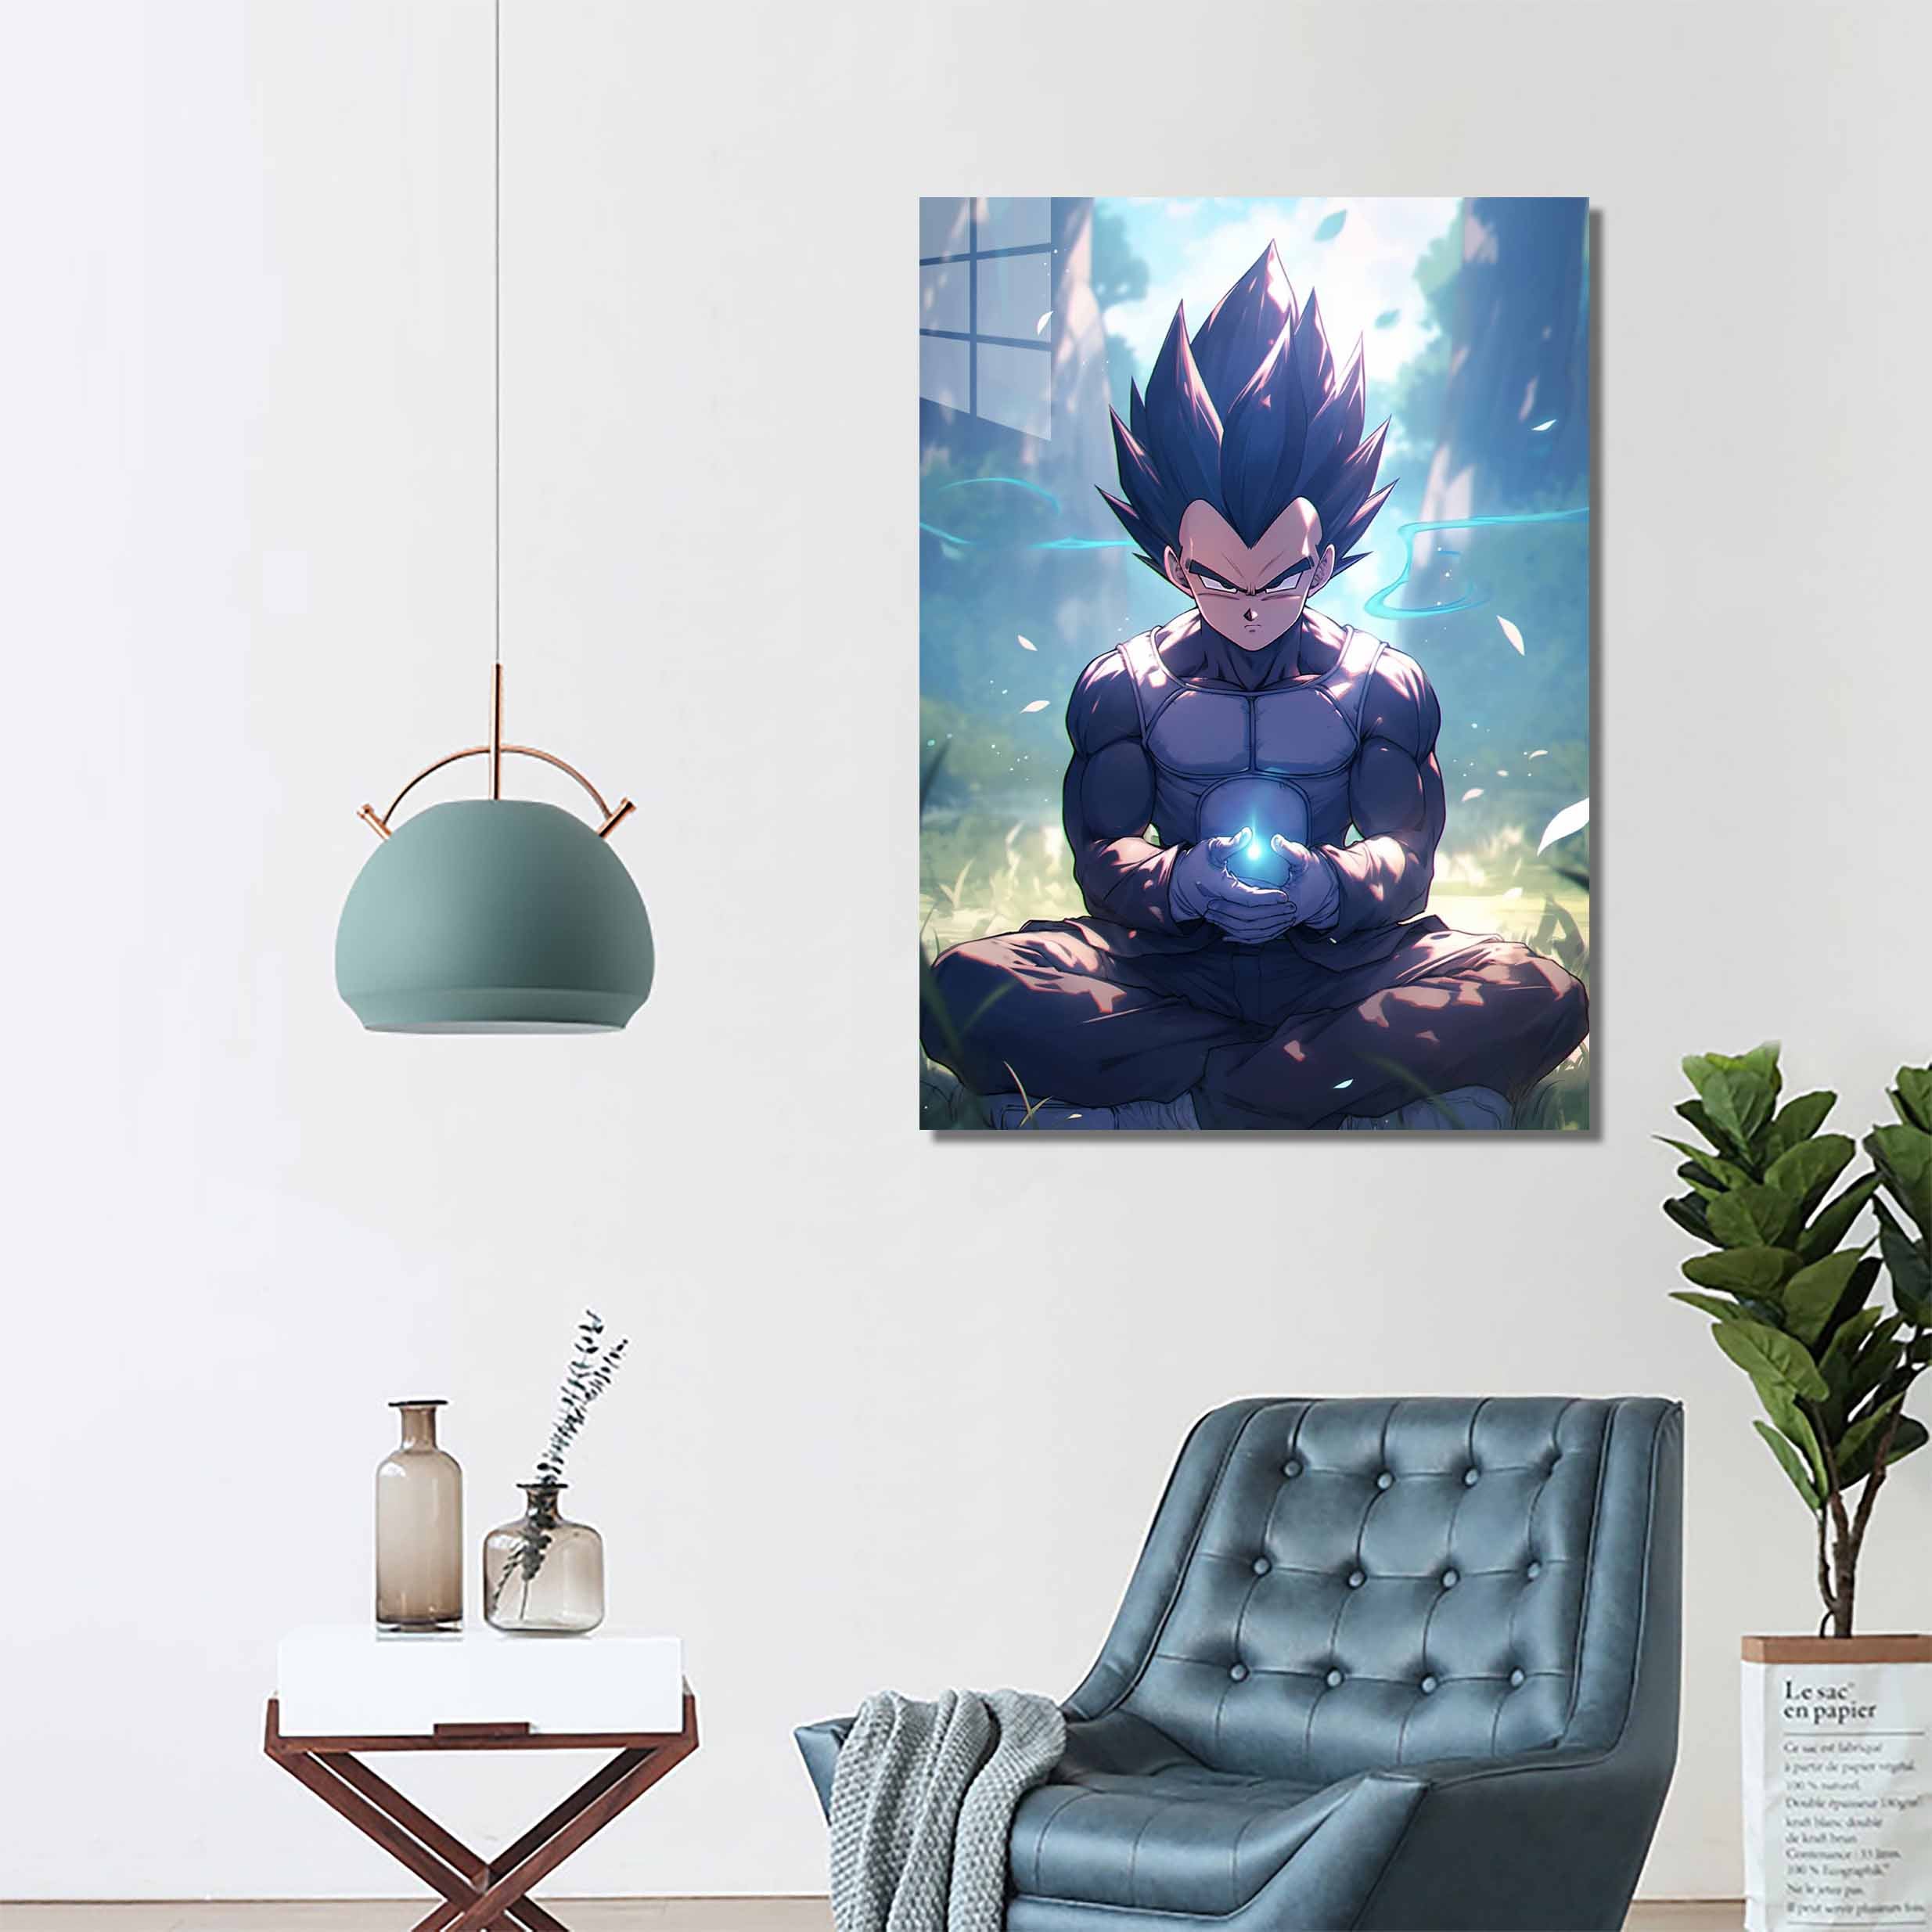 Princely Calm_ Vegeta's Meditation in the Storm